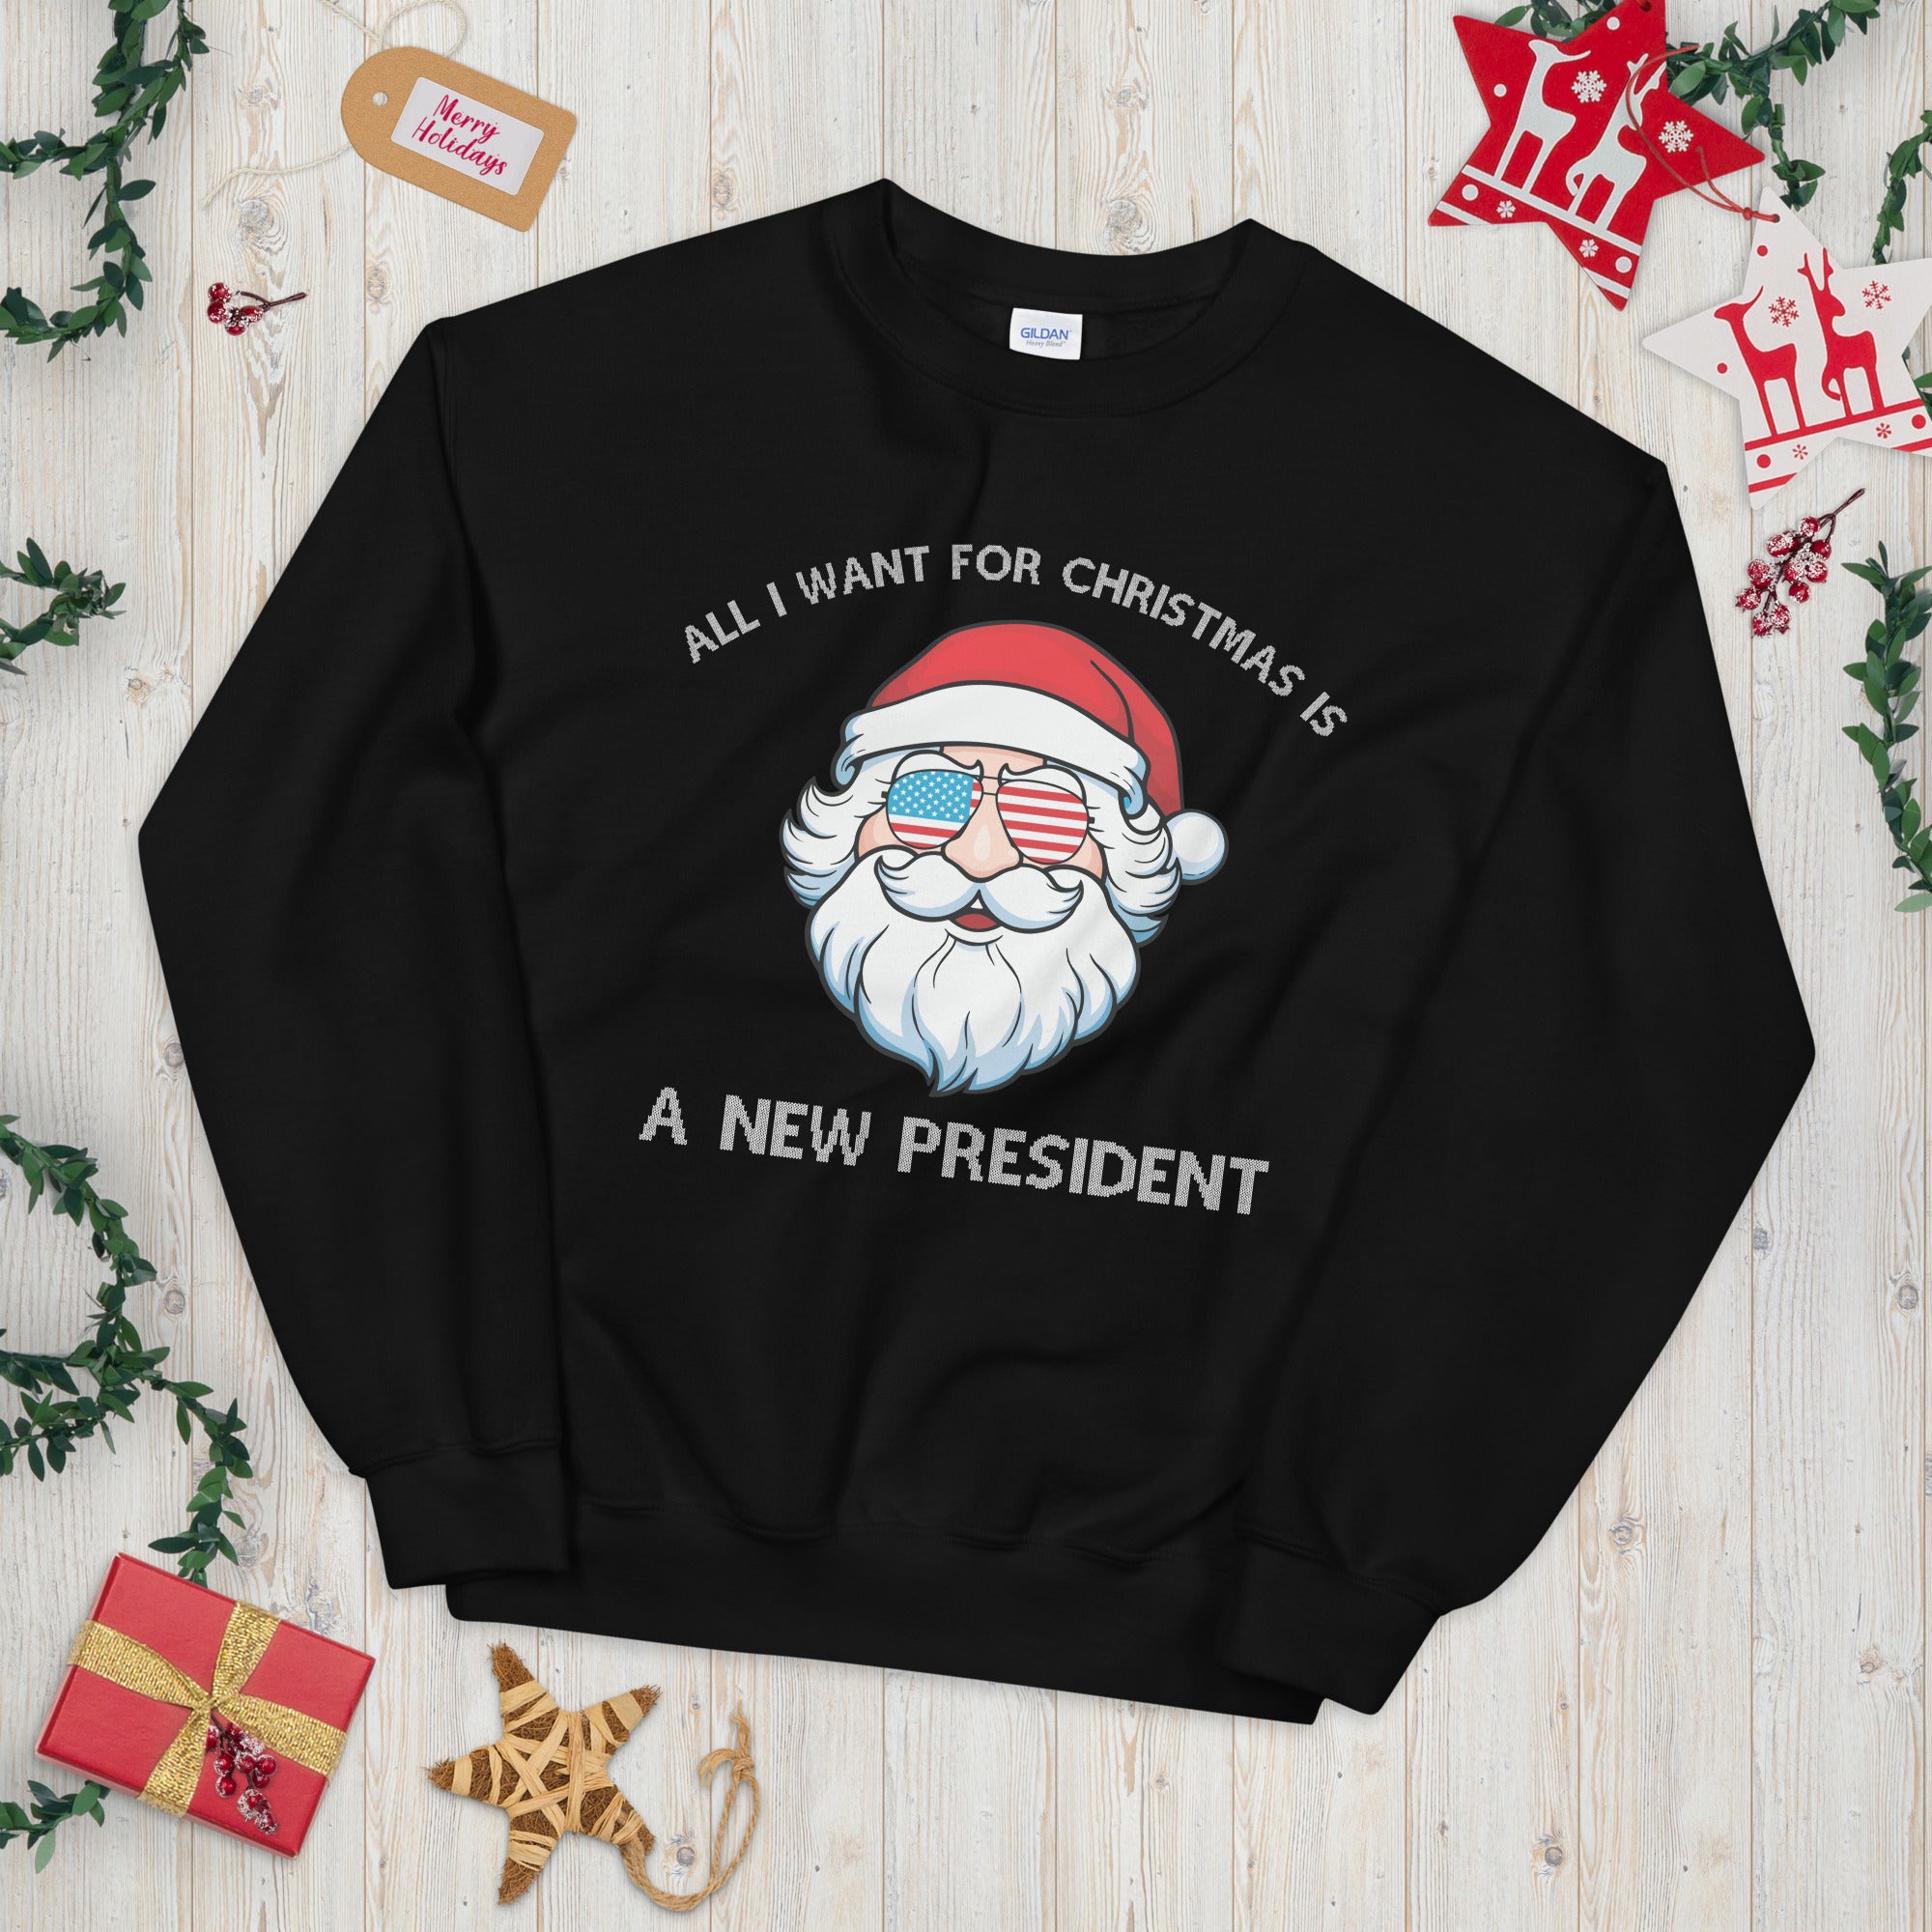 All I Want For Christmas Is A New President, Republican Christmas Sweater, Funny Biden Christmas Sweatshirt, Patriot Shirt, Xmas Gifts - Madeinsea©